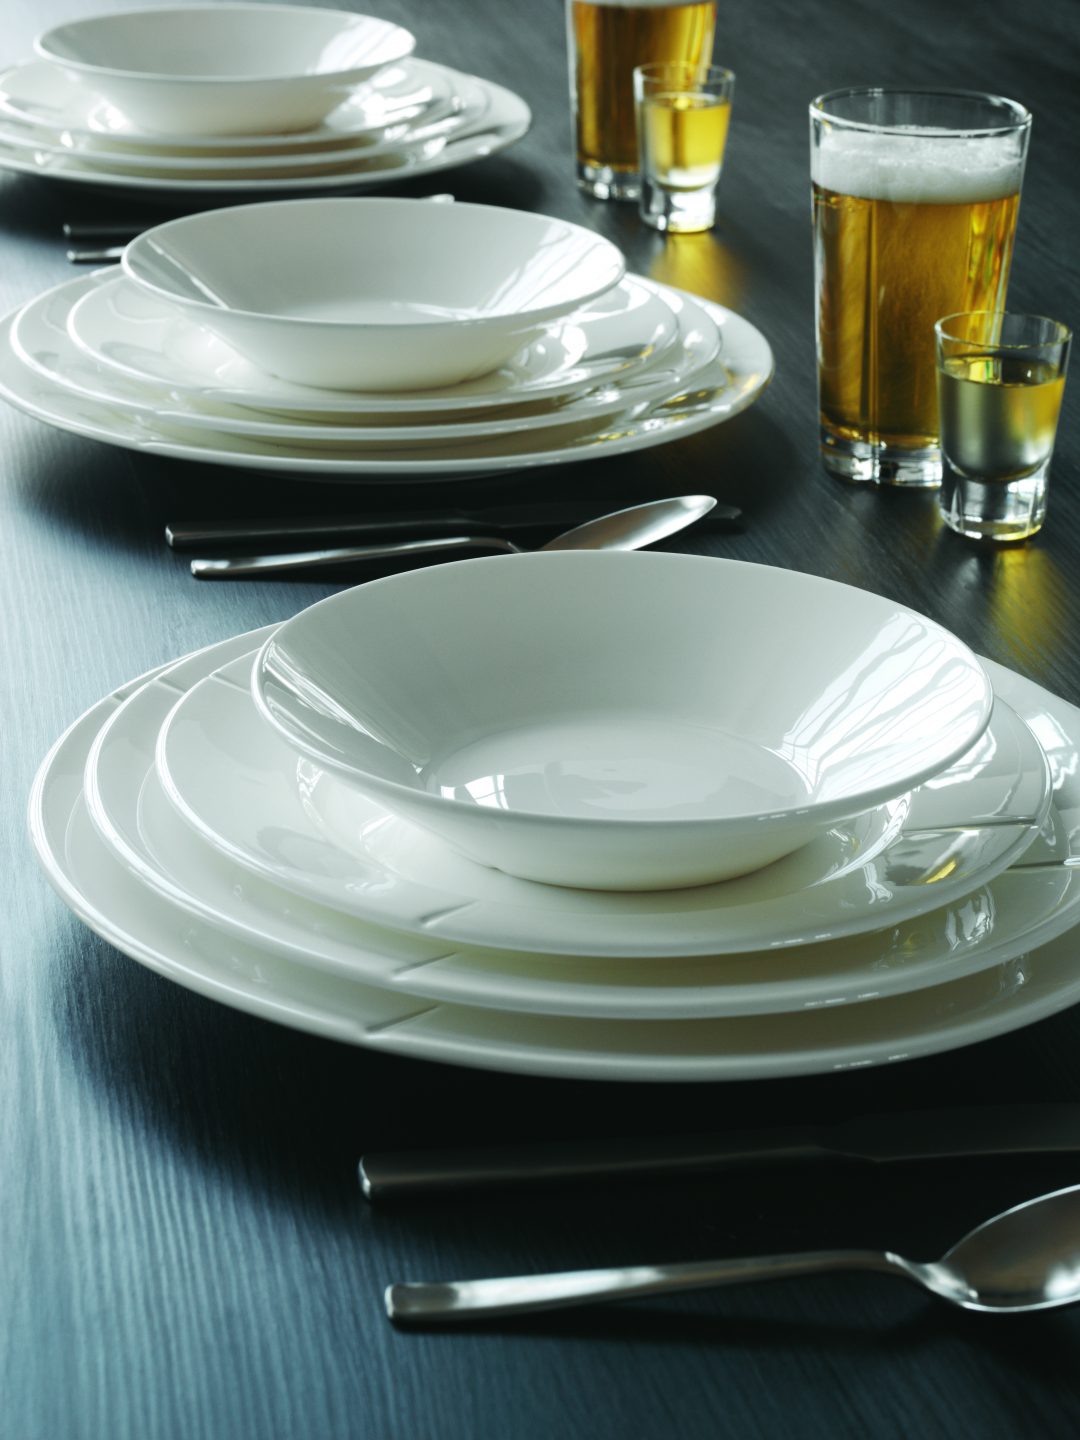 Grand Cru porcelain collection by Rosendahl